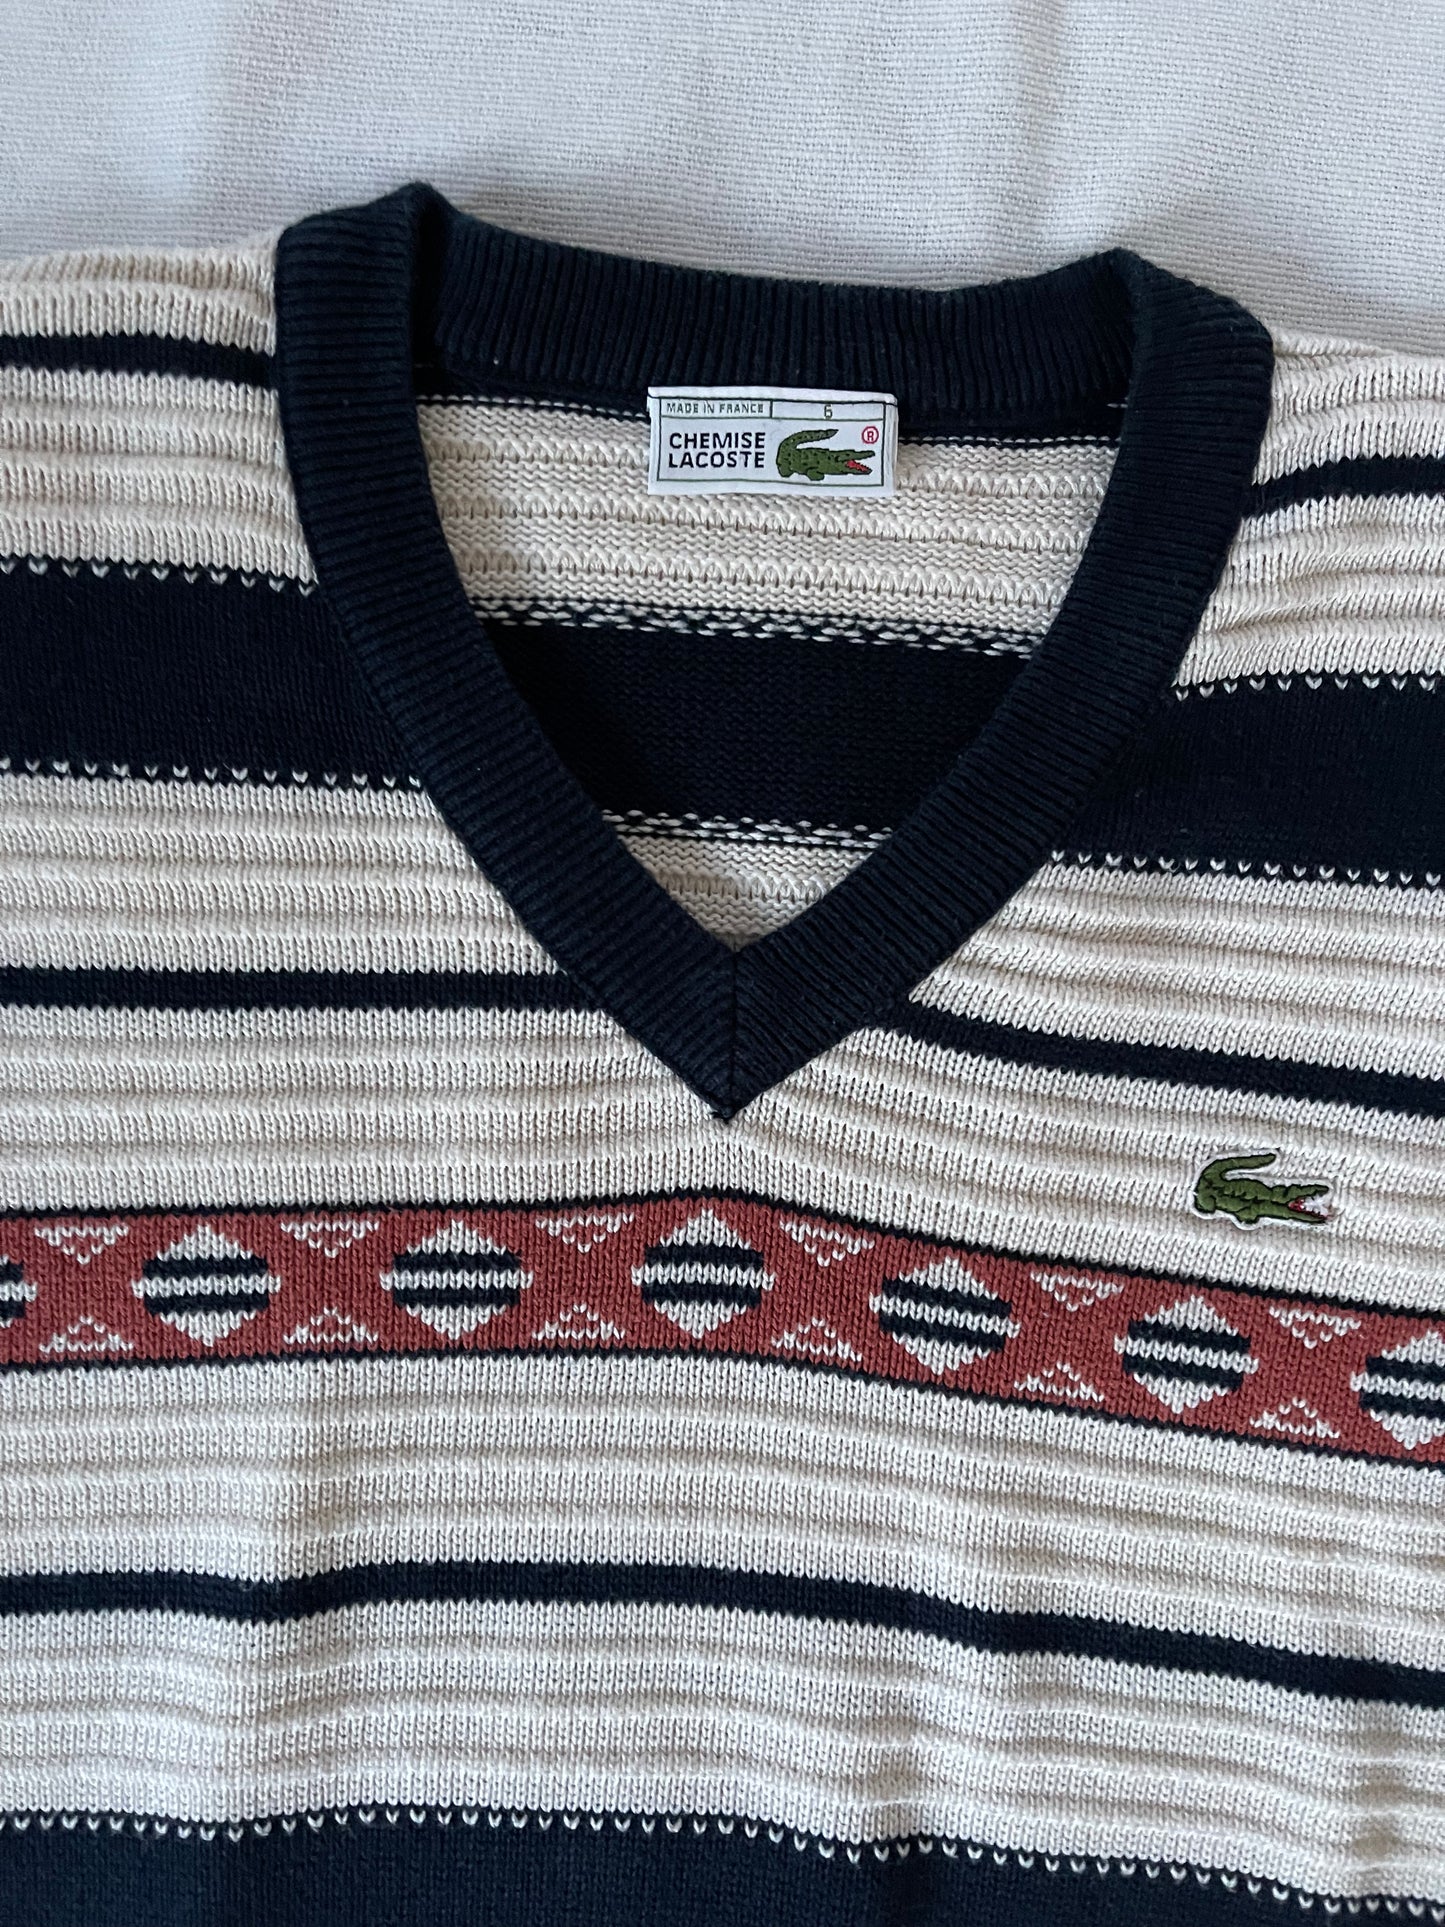 Vintage 80's Lacoste Jumper Made in France Size 6/7 100% Cotton Off White Black